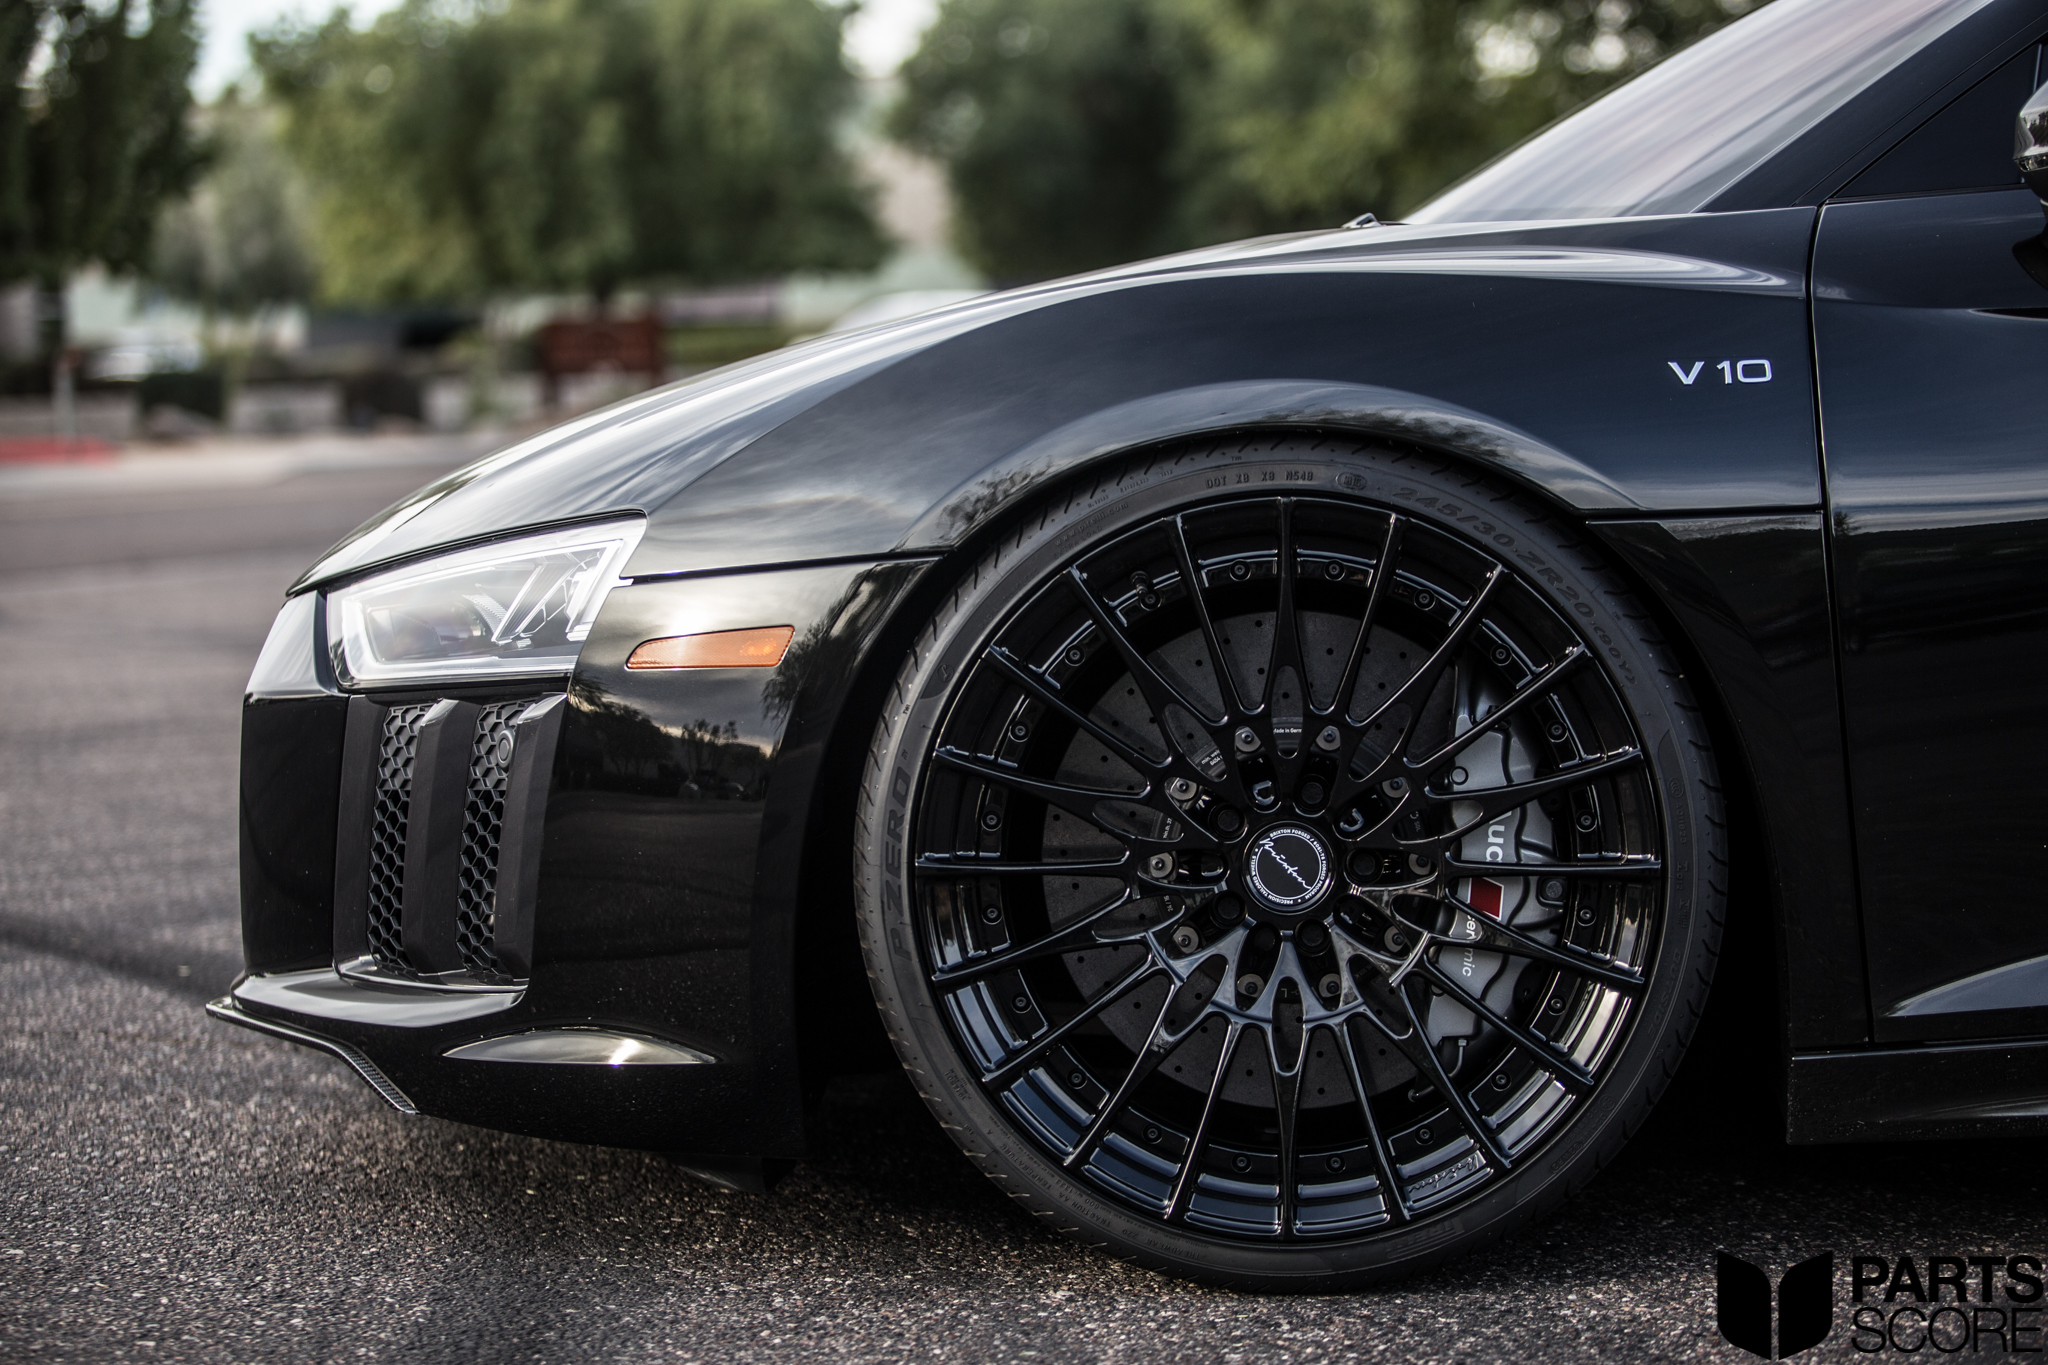 2 piece wheels, 205mph, 605hp, all wheel drive, audi r8, audi r8 coilovers, audi r8 modifications, audi r8 mods, audi r8 shock failure, audi r8 v10, audi r8 v8, audi rs, audi wheels, audi wheels scottsdale, audir8, awd, brixton, brixton forged, brixton forged wheels, brixton wheels, Coilovers, coils, height adjustable spring, hyper car, new wheels, parts score, partsscore, quattro, r8, r8 coilovers, r8 lms, r8 springs, r8 suspension, r8 v10 +, r8 v10 coilovers, r8 v10 h.a.s. kit, r8 v10 has kit, r8 v10 height adjustable spring kit, r8 v10 plus, r8 v10 plus mods, r8 v10 springs, r8 v10 wheels, r8 v8 coilovers, r8 v8 has kit, r8 v8 springs, r8 wheels, r8racecar, r8v10+, r8v10plus, r9v10, race, racecar, racing, slammed, Springs, stance, super car, supercar, track, track day, v10 plus mods, v8 v10, wheels